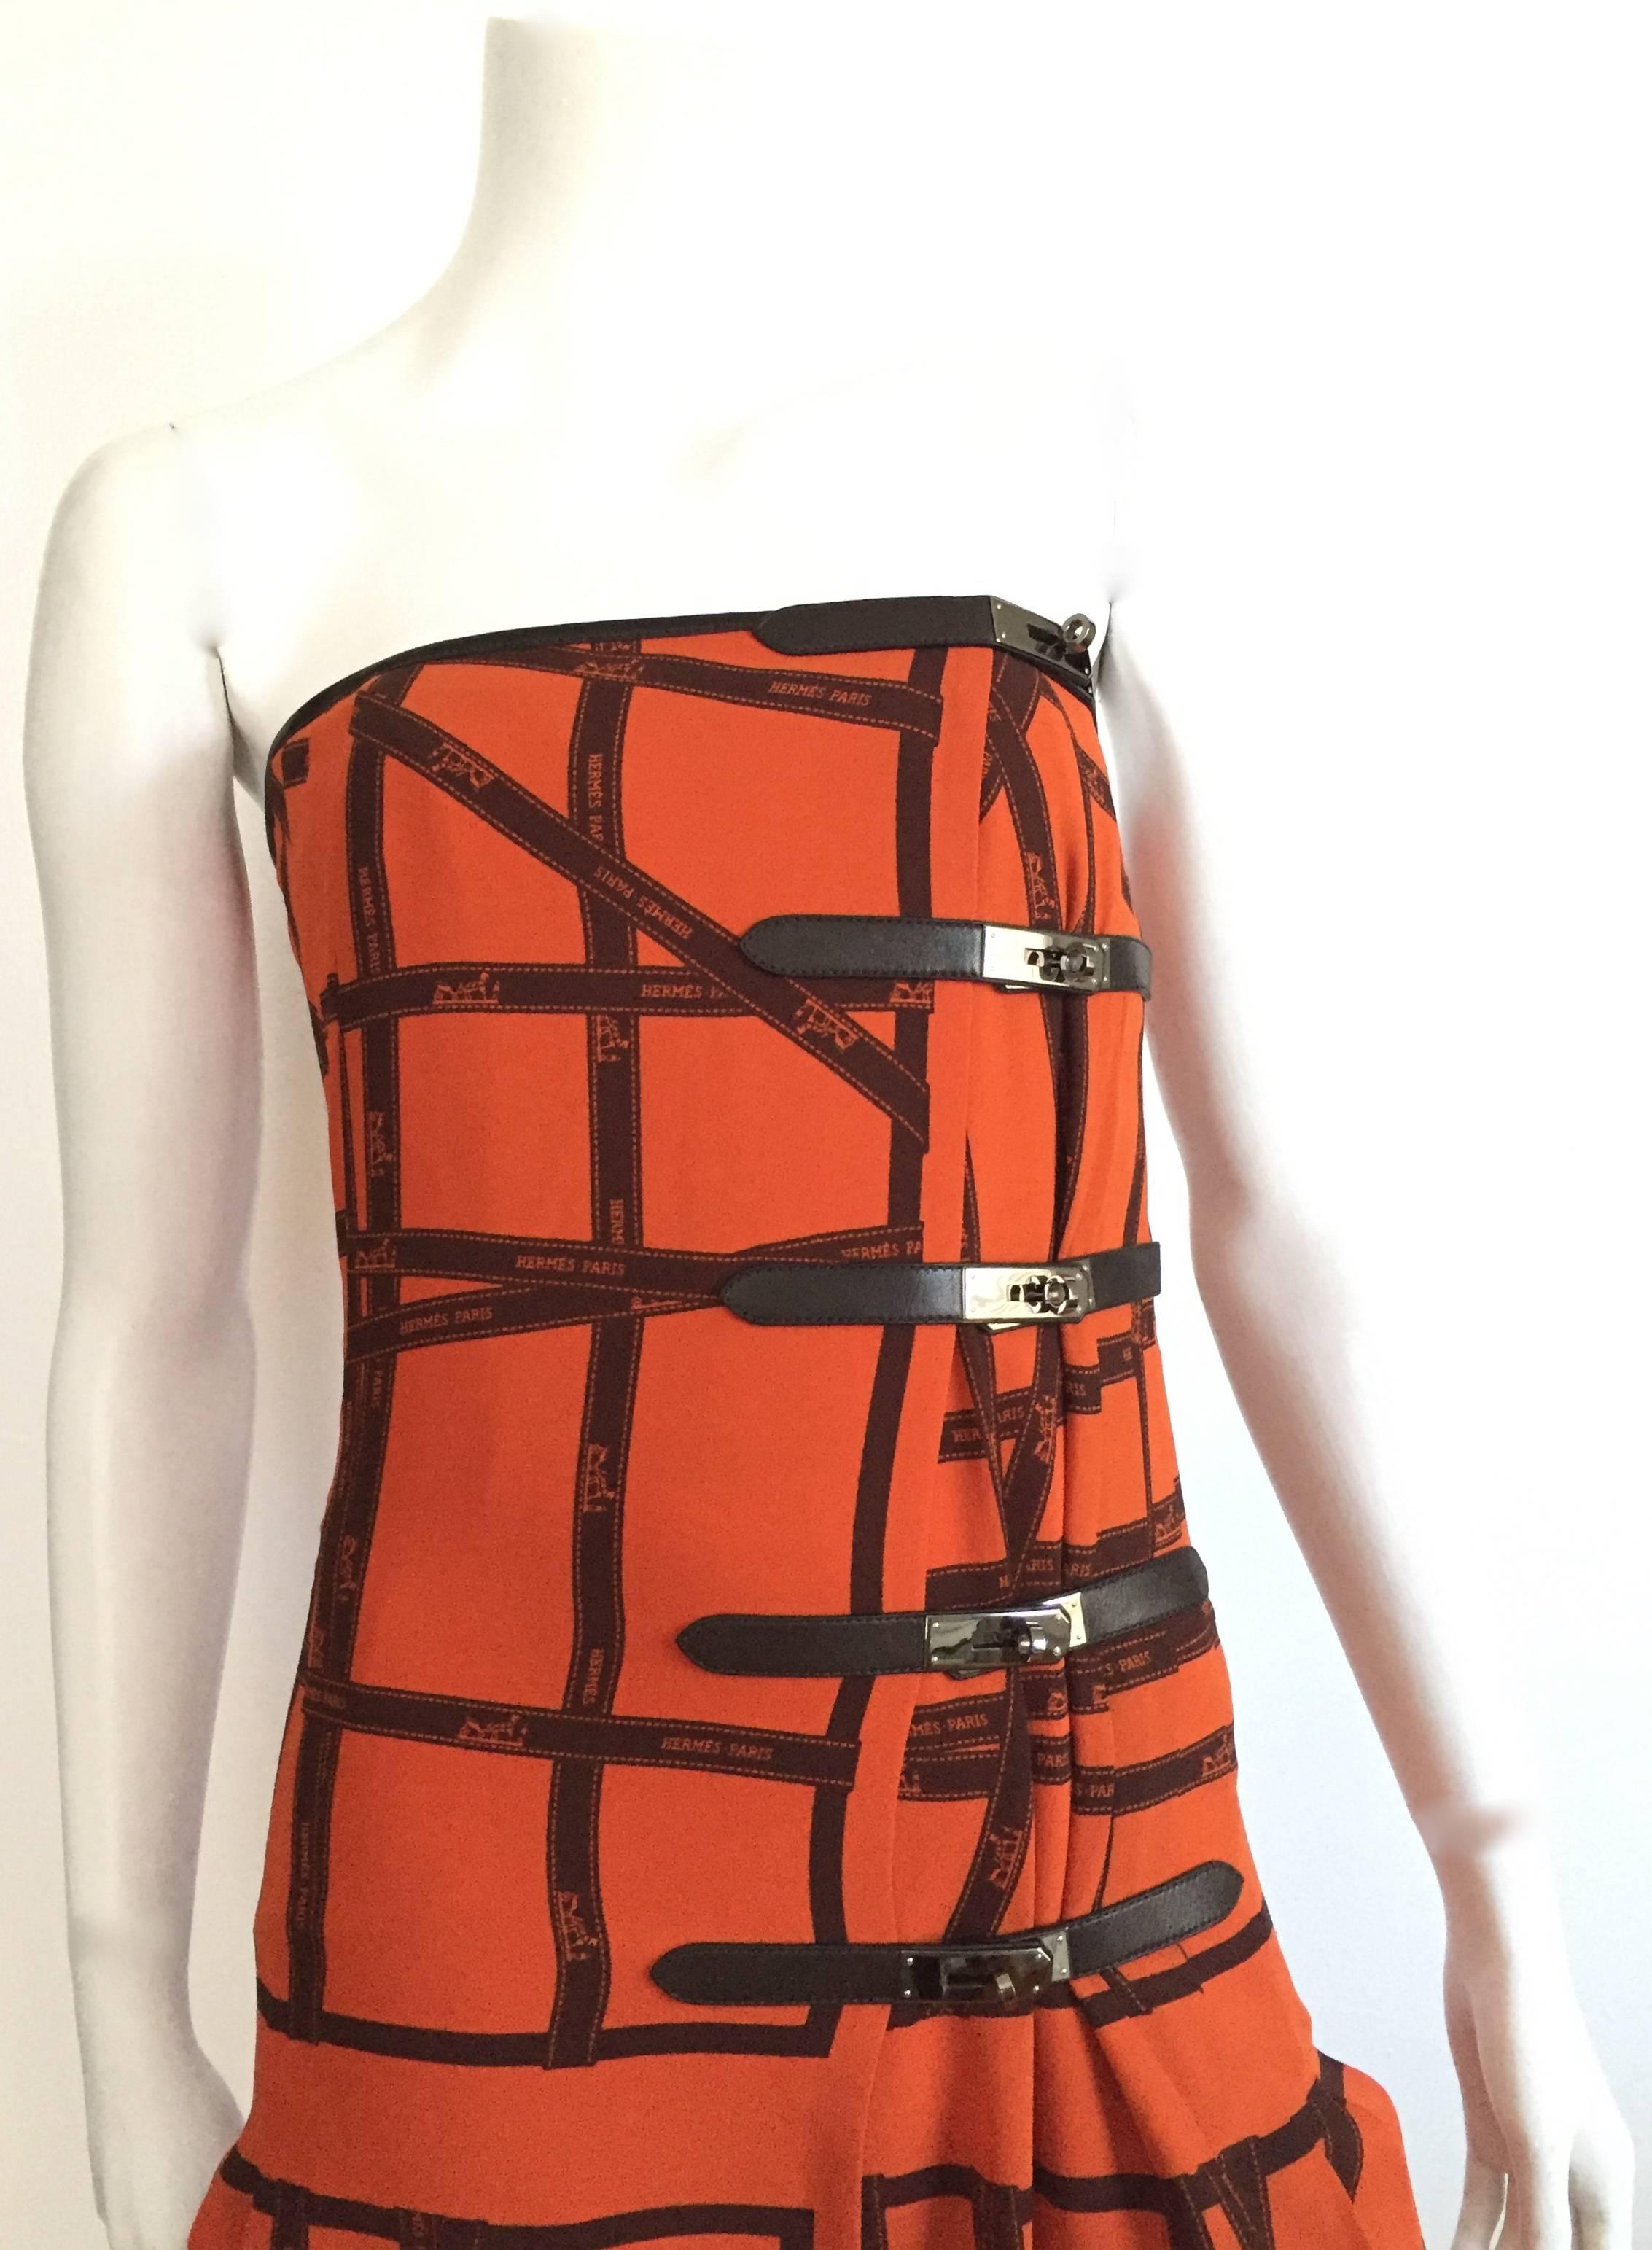 Hermes by Jean Paul Gaultier 2004 orange silk crepe Georgette Bolduc dress is a French size 38 but fits a USA size 4. Please see & use the measurements below so that you may properly measure your lovely body. The mannequin is a size 4 and this dress